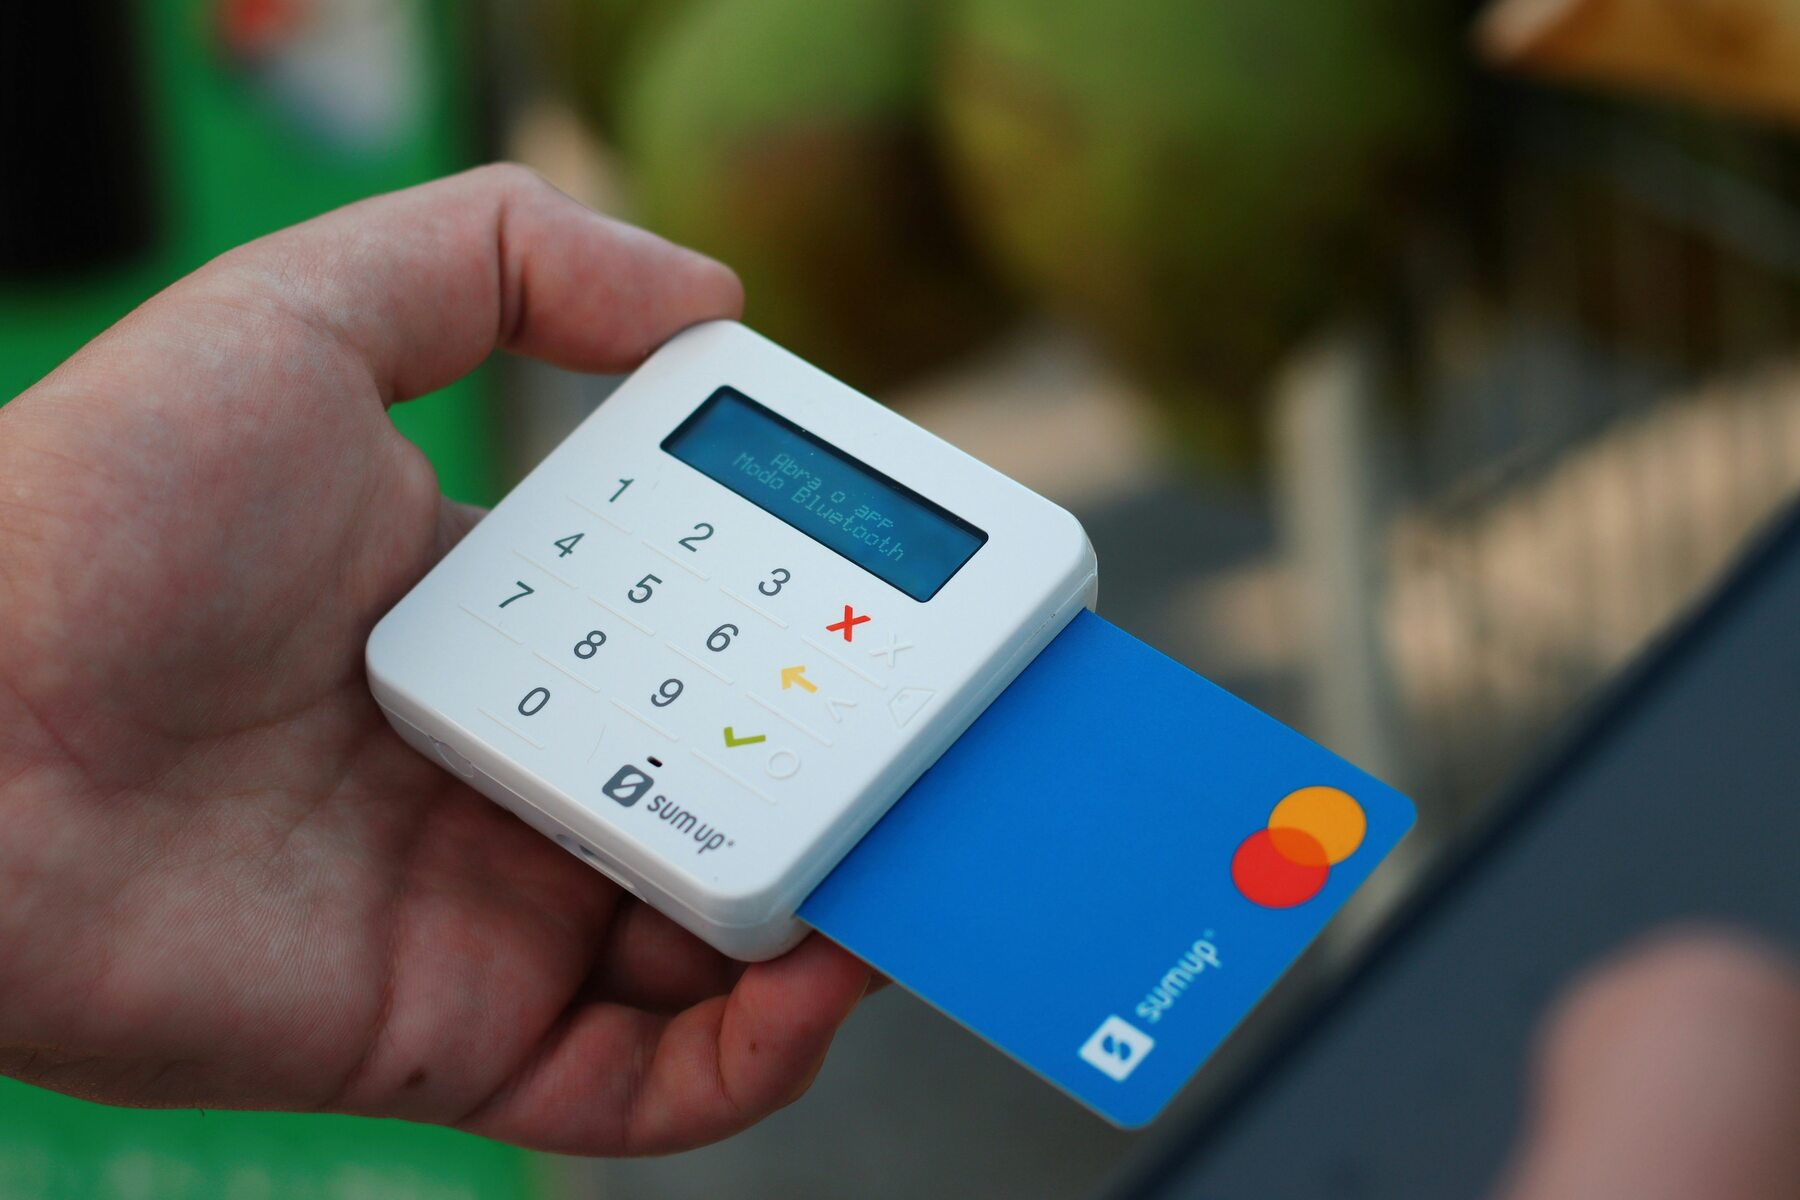 Credit card inserted on a portable payment terminal